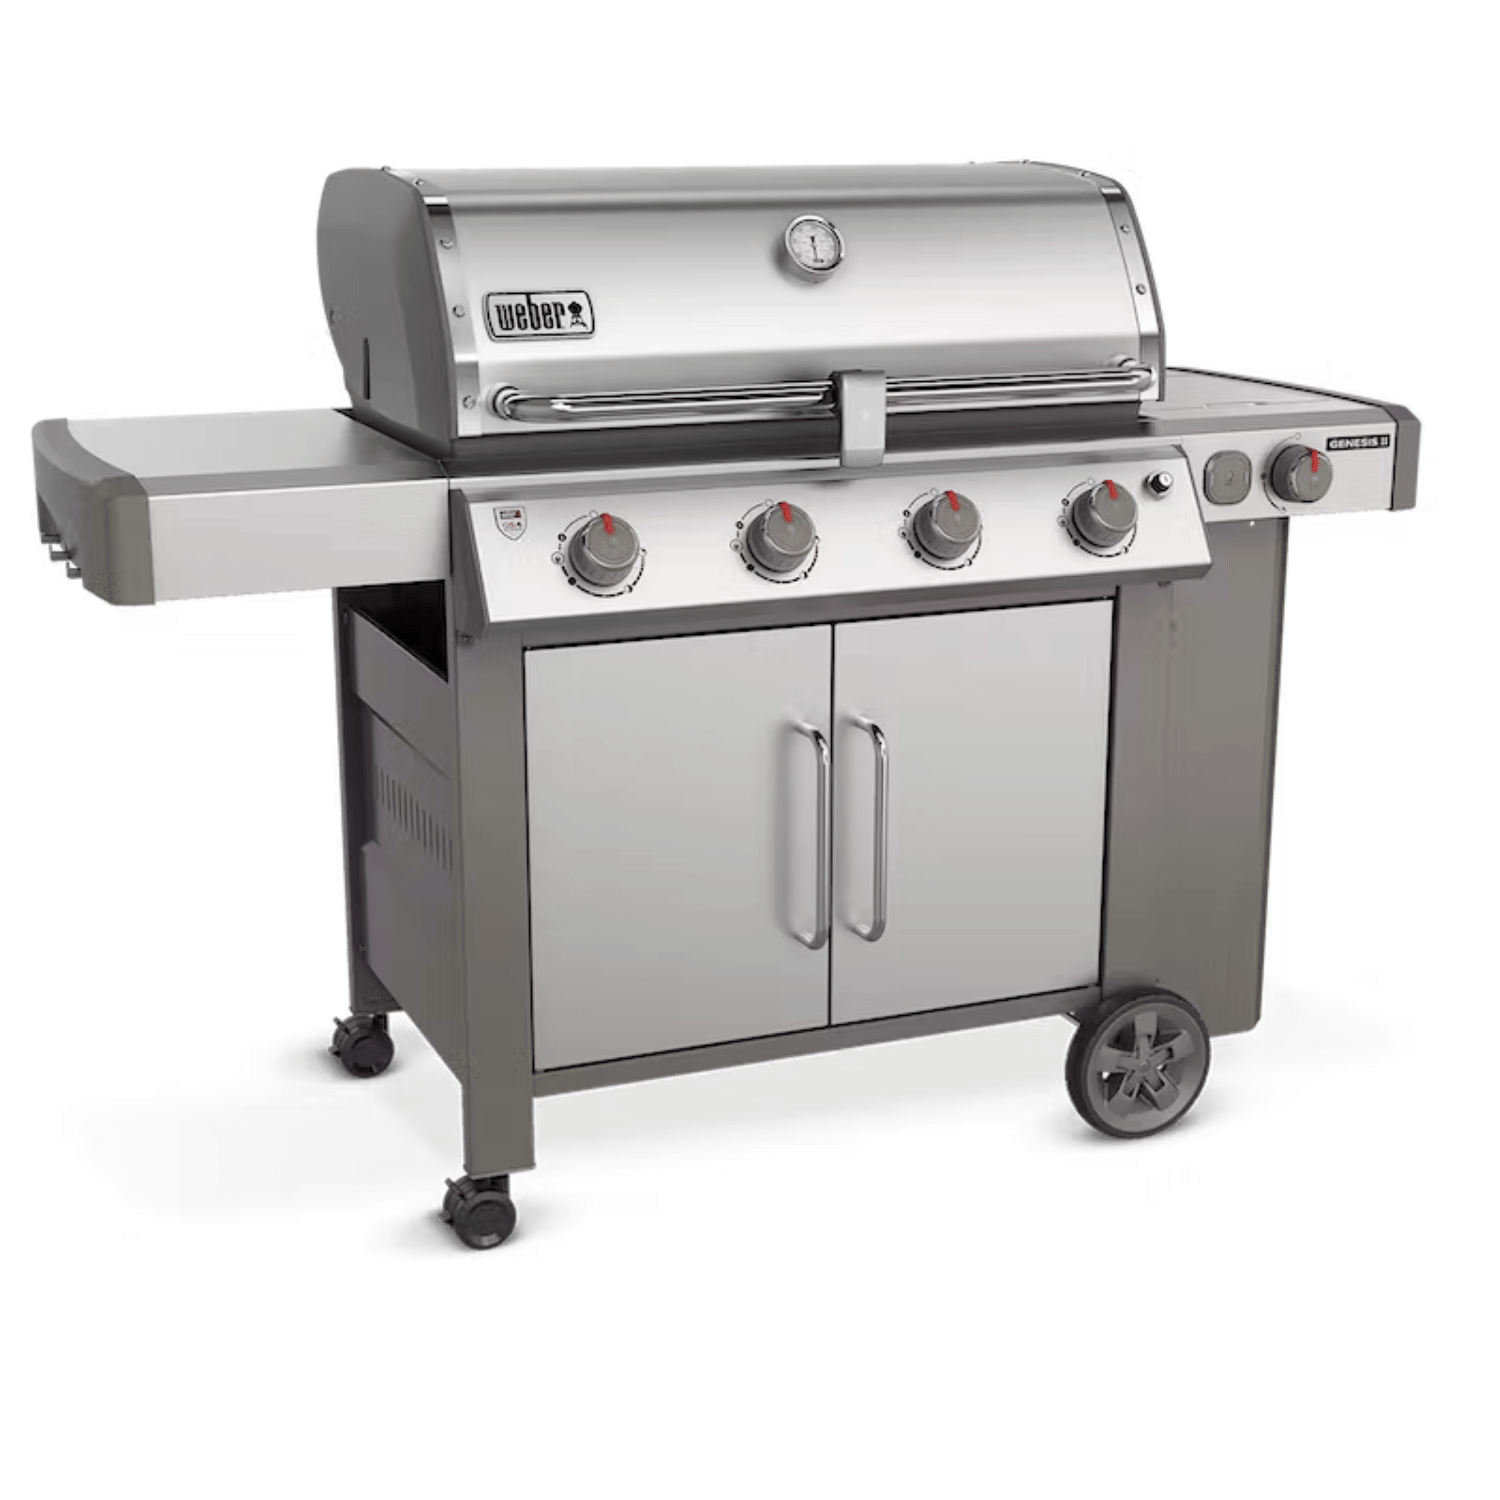 Weber Genesis II E-455 premium grill for outdoor barbecuing available at MeatKing.hk0